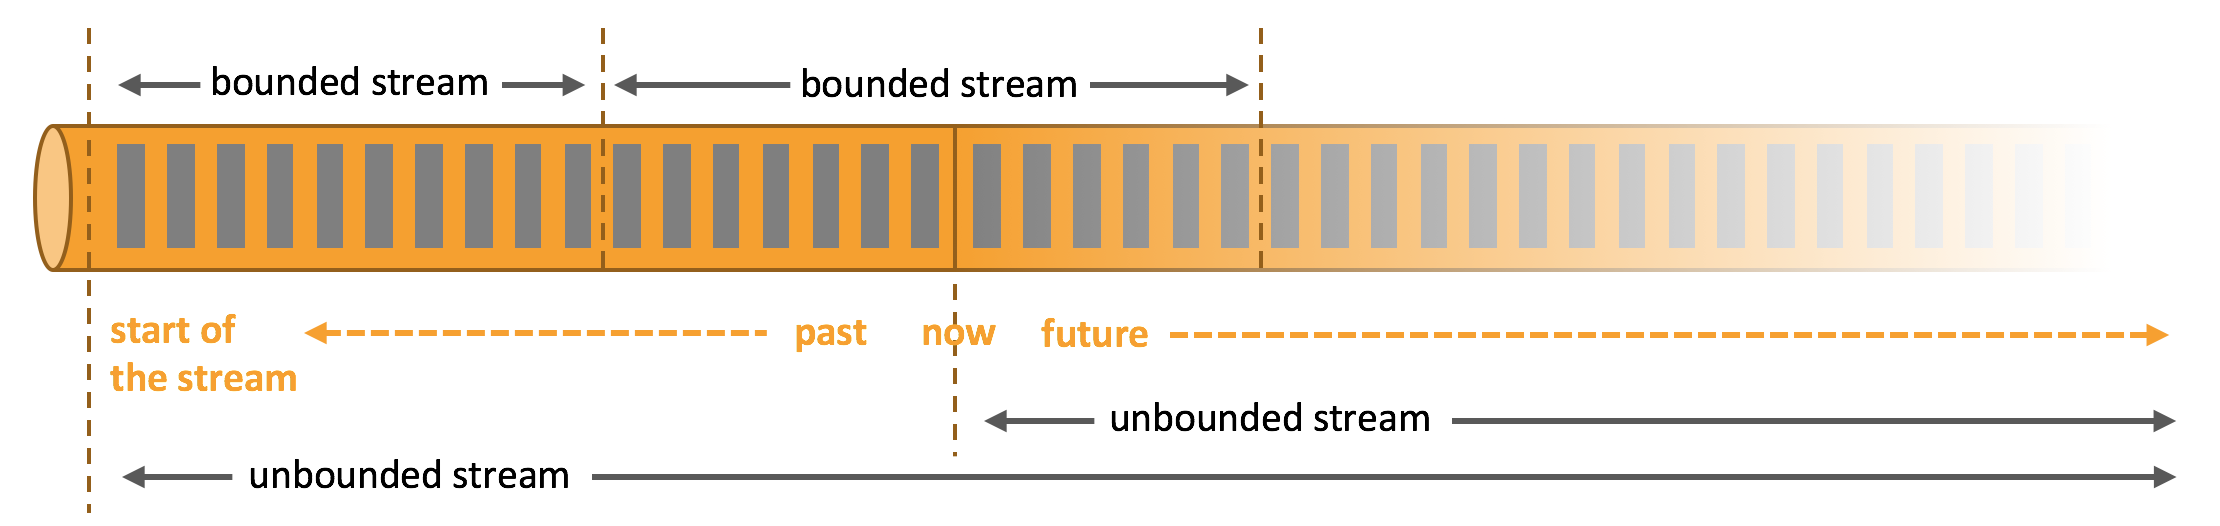 unbounded streams 和 bounded streams